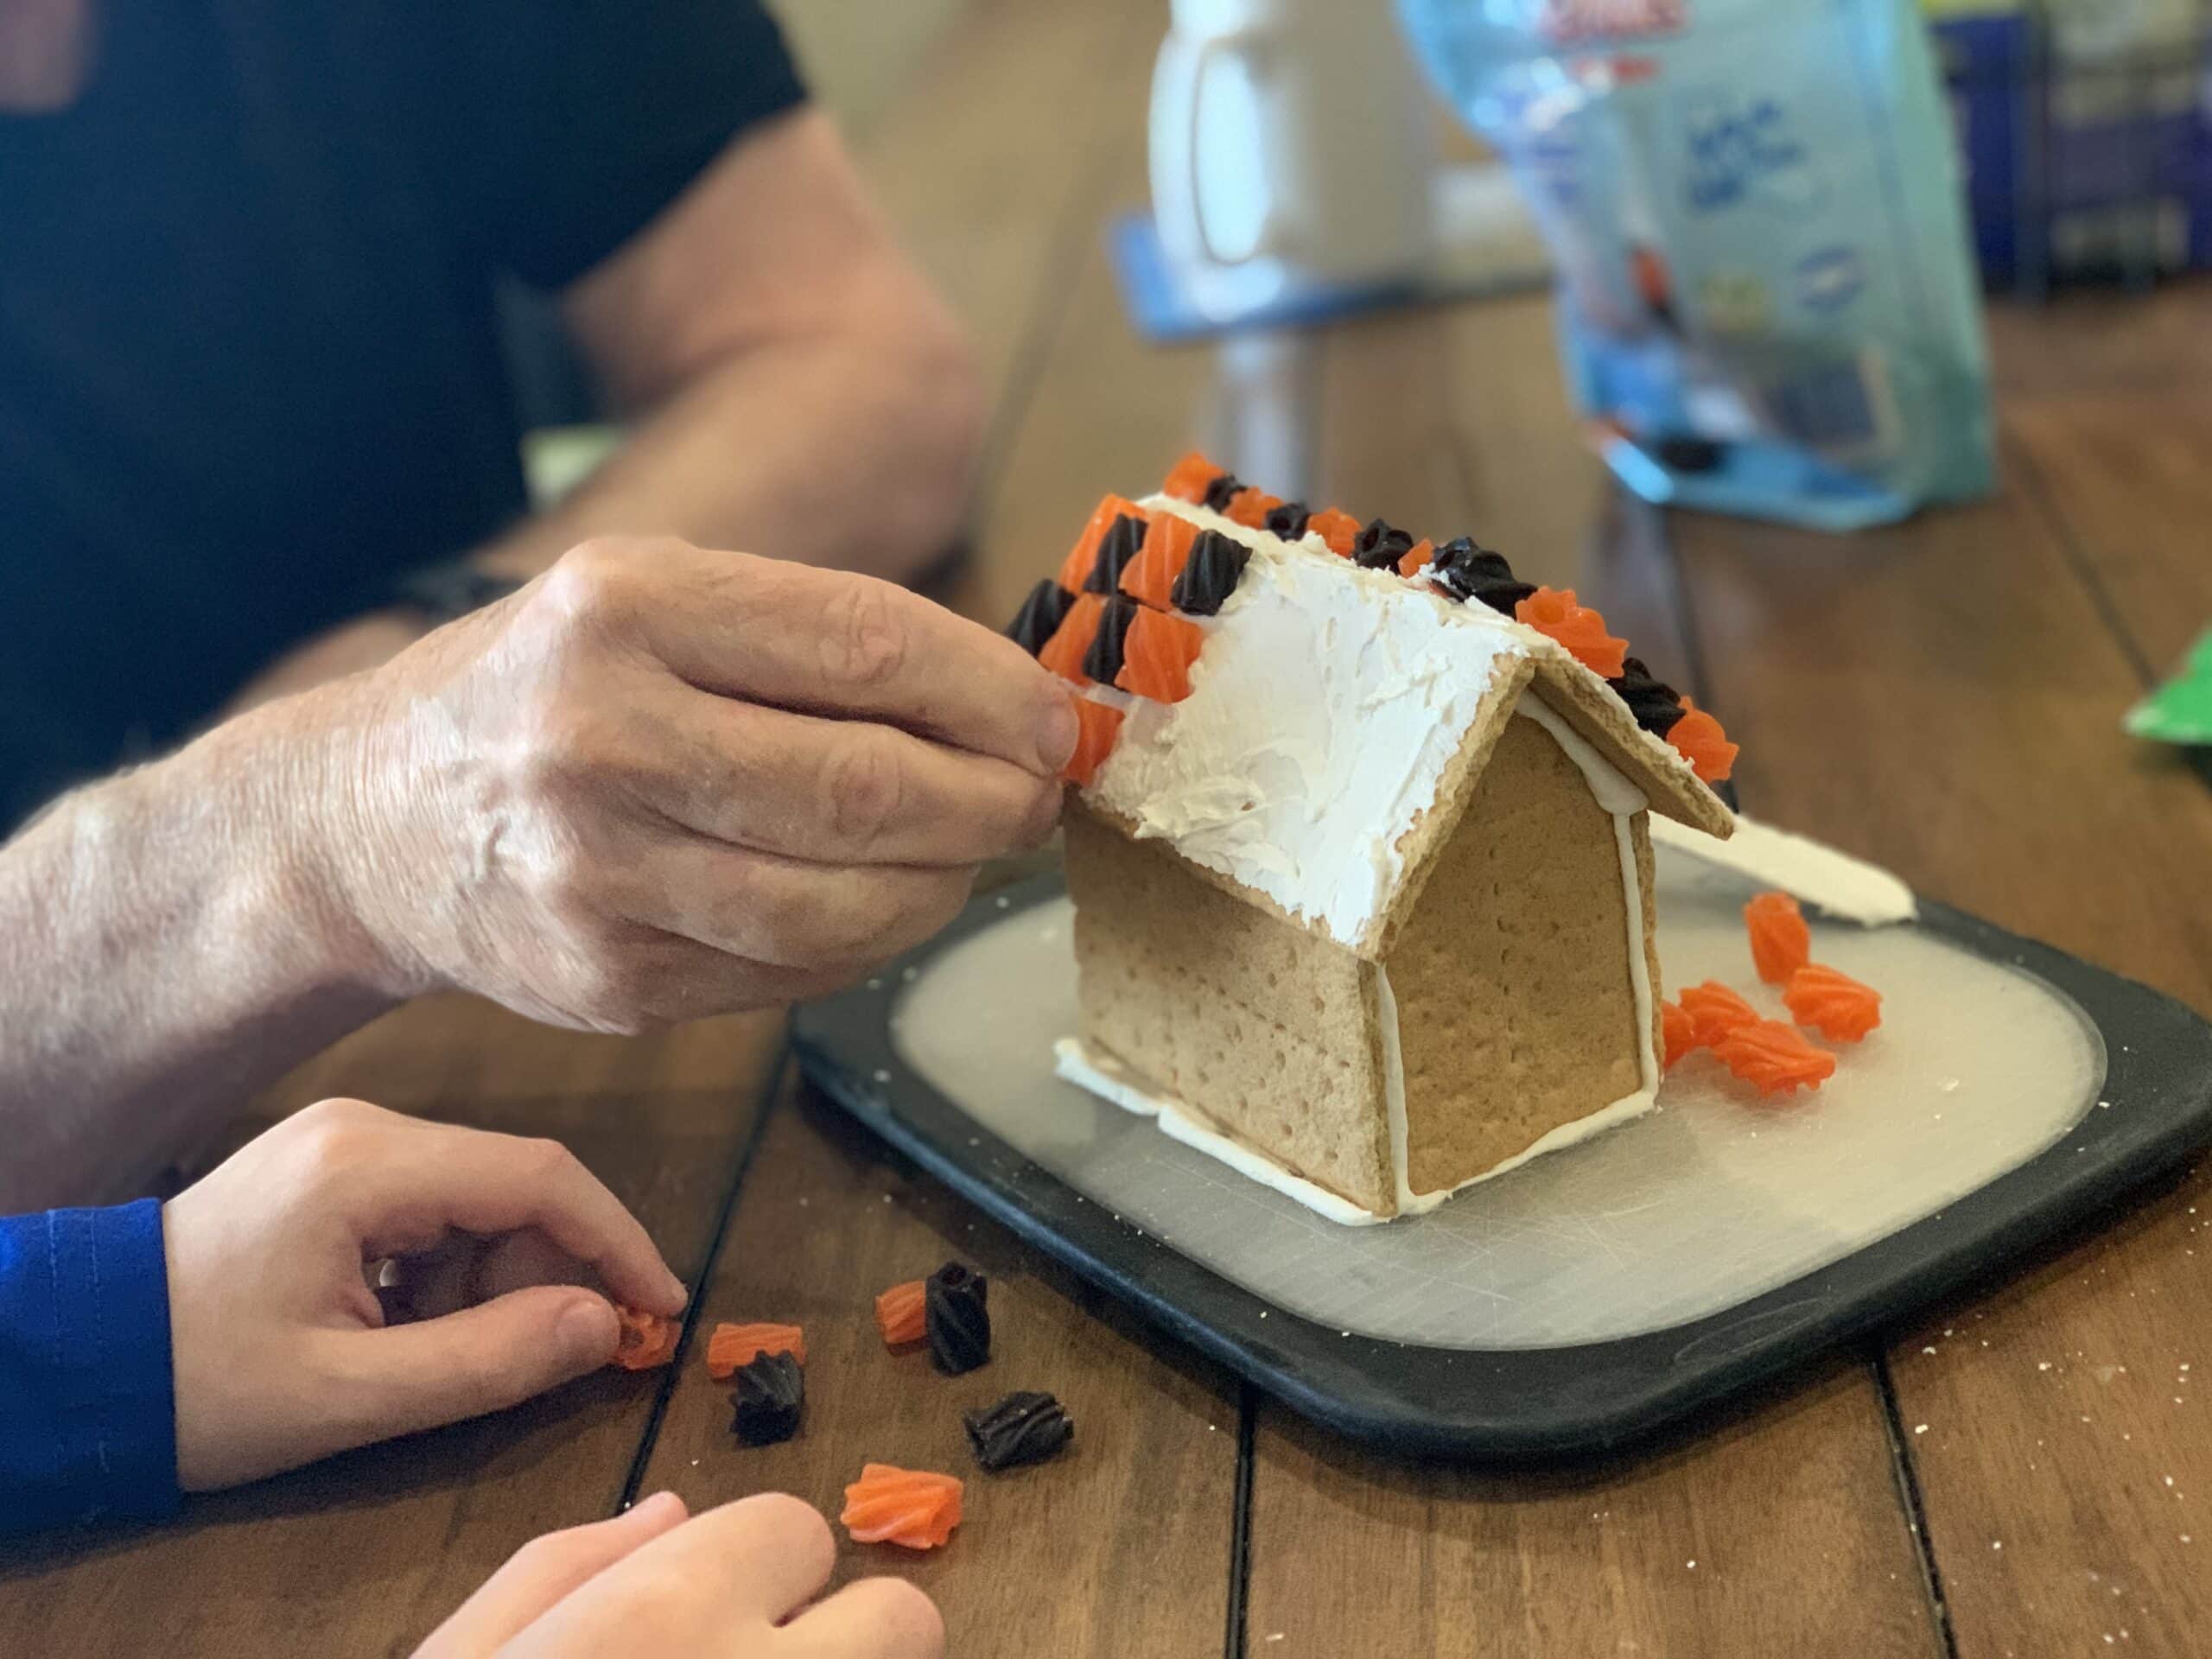 Decorating gingerbread house